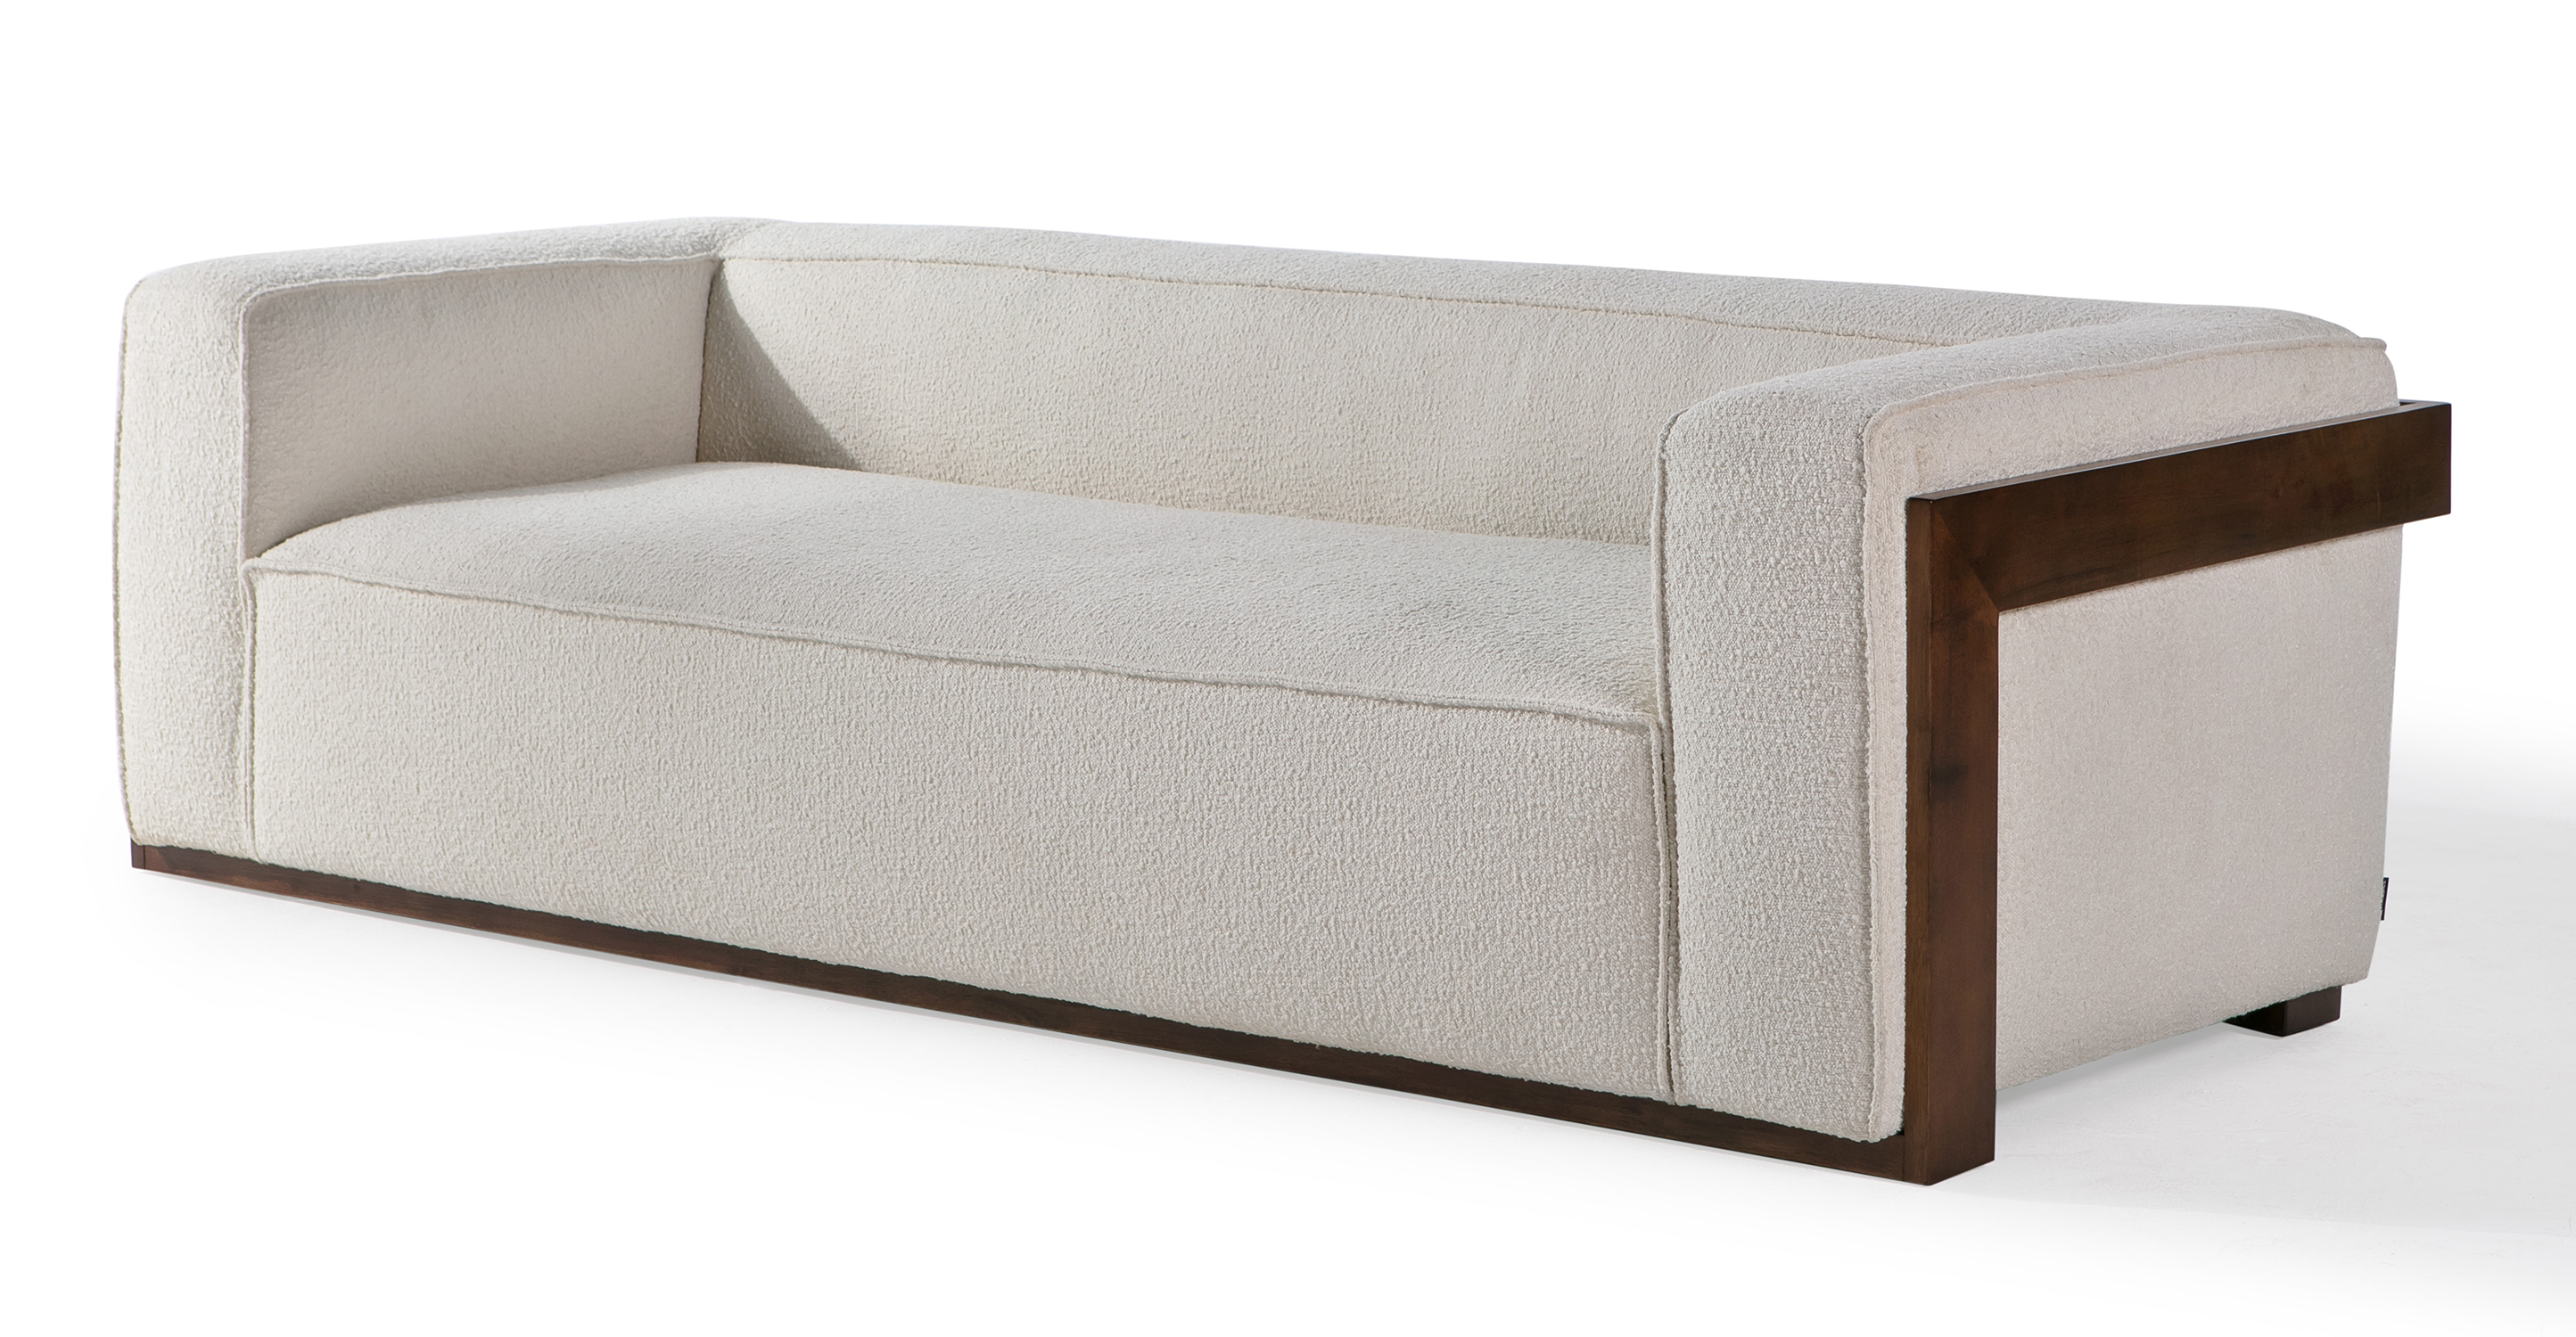 Maddox Cream is a modern sofa with one solid affixed seat cushion and small back cushion. Flat walnut wood arms support the arms and surround the back and under the front. The vibe is fun and modern.